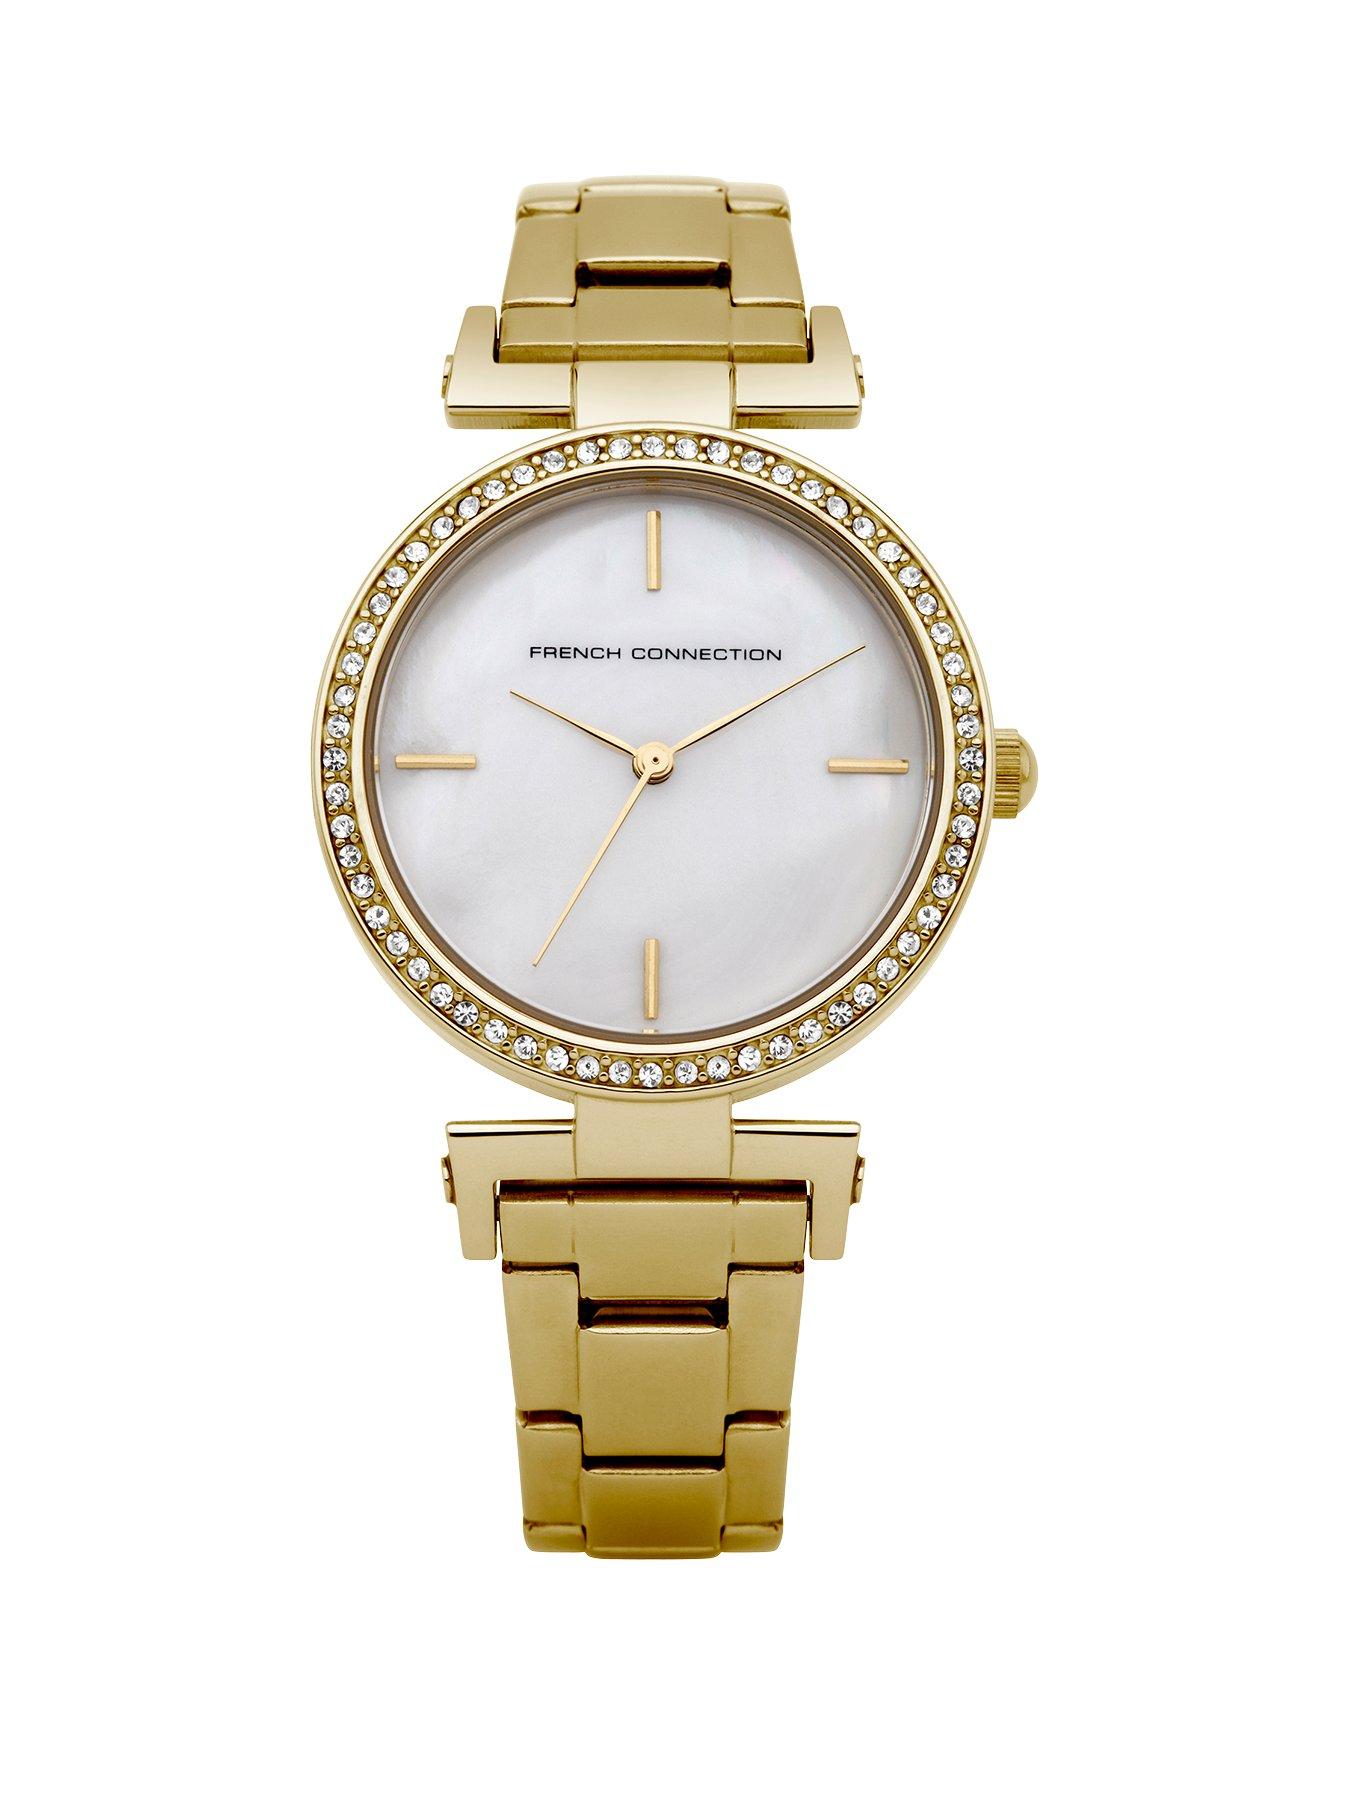 Ladies watches | Gifts & jewellery | www.littlewoods.com